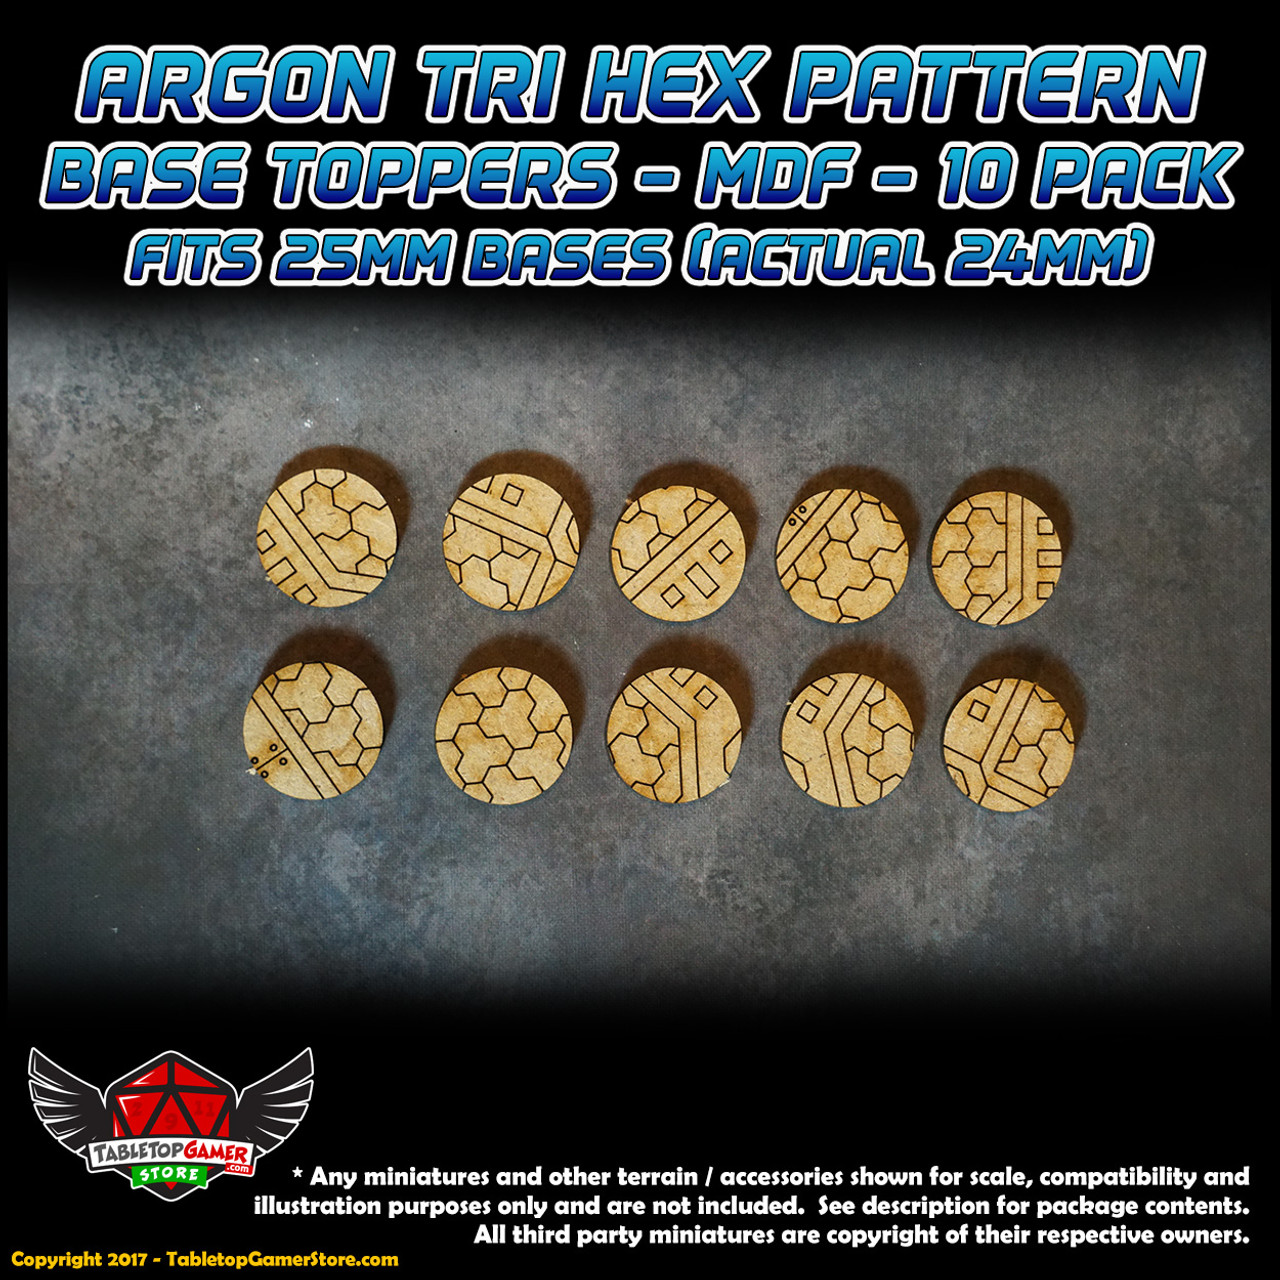 Argon Tri-Hex Pattern Base Toppers - Fits 25mm Bases - 24mm Actual - MDF - 10 Pack